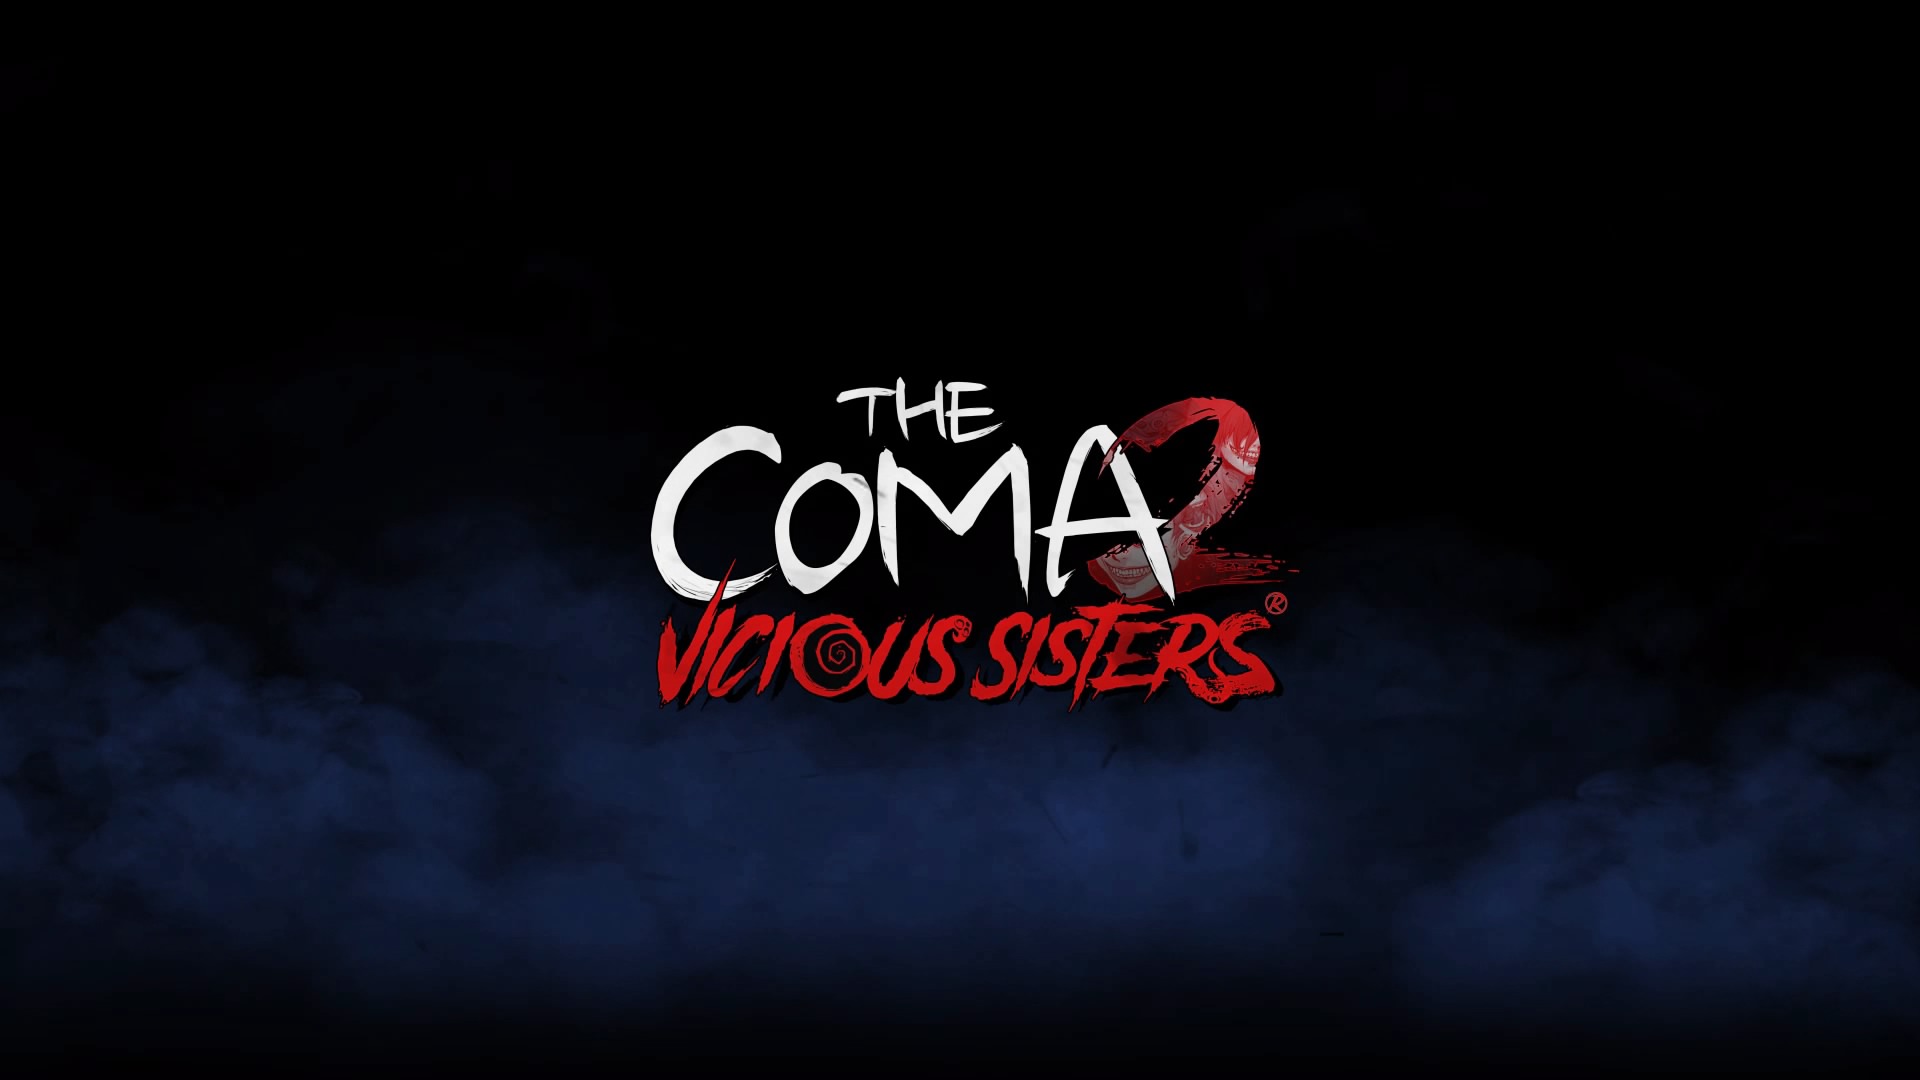 The Coma 2 Vicious Sisters (2019 – Survival Horror – Playstation 4)